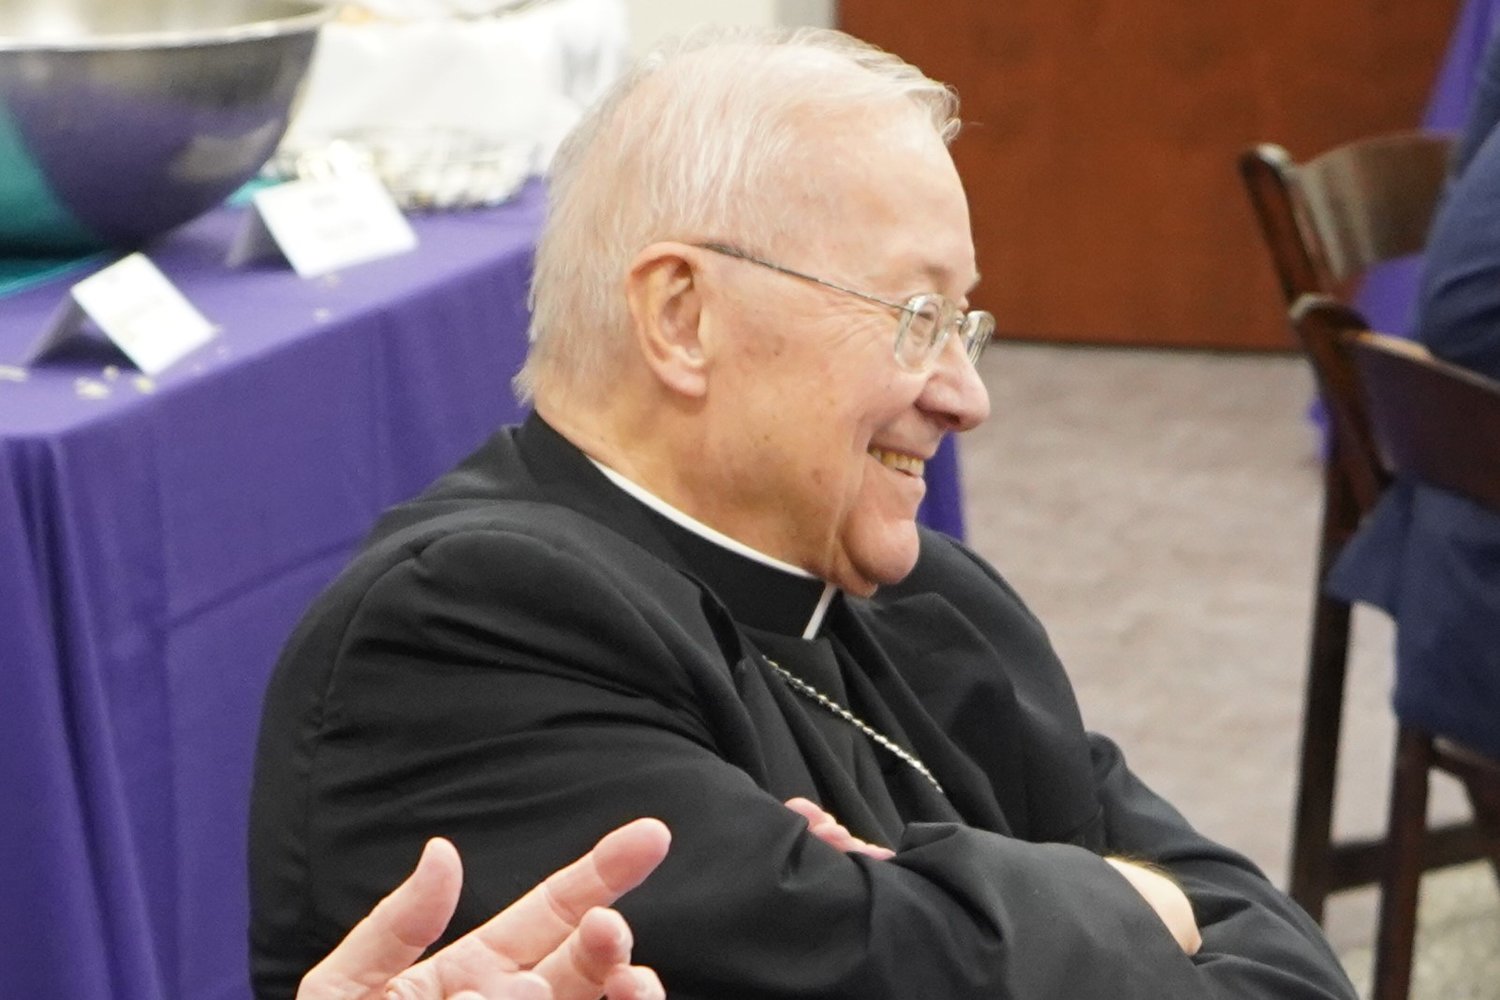 Bishop Emeritus John R. Gaydos attends a celebration of the 10th anniversary of the founding of Catholic Charities of Central and Northern Missouri and the completion of the agency’s new headquarters in Jefferson City in October 2021.